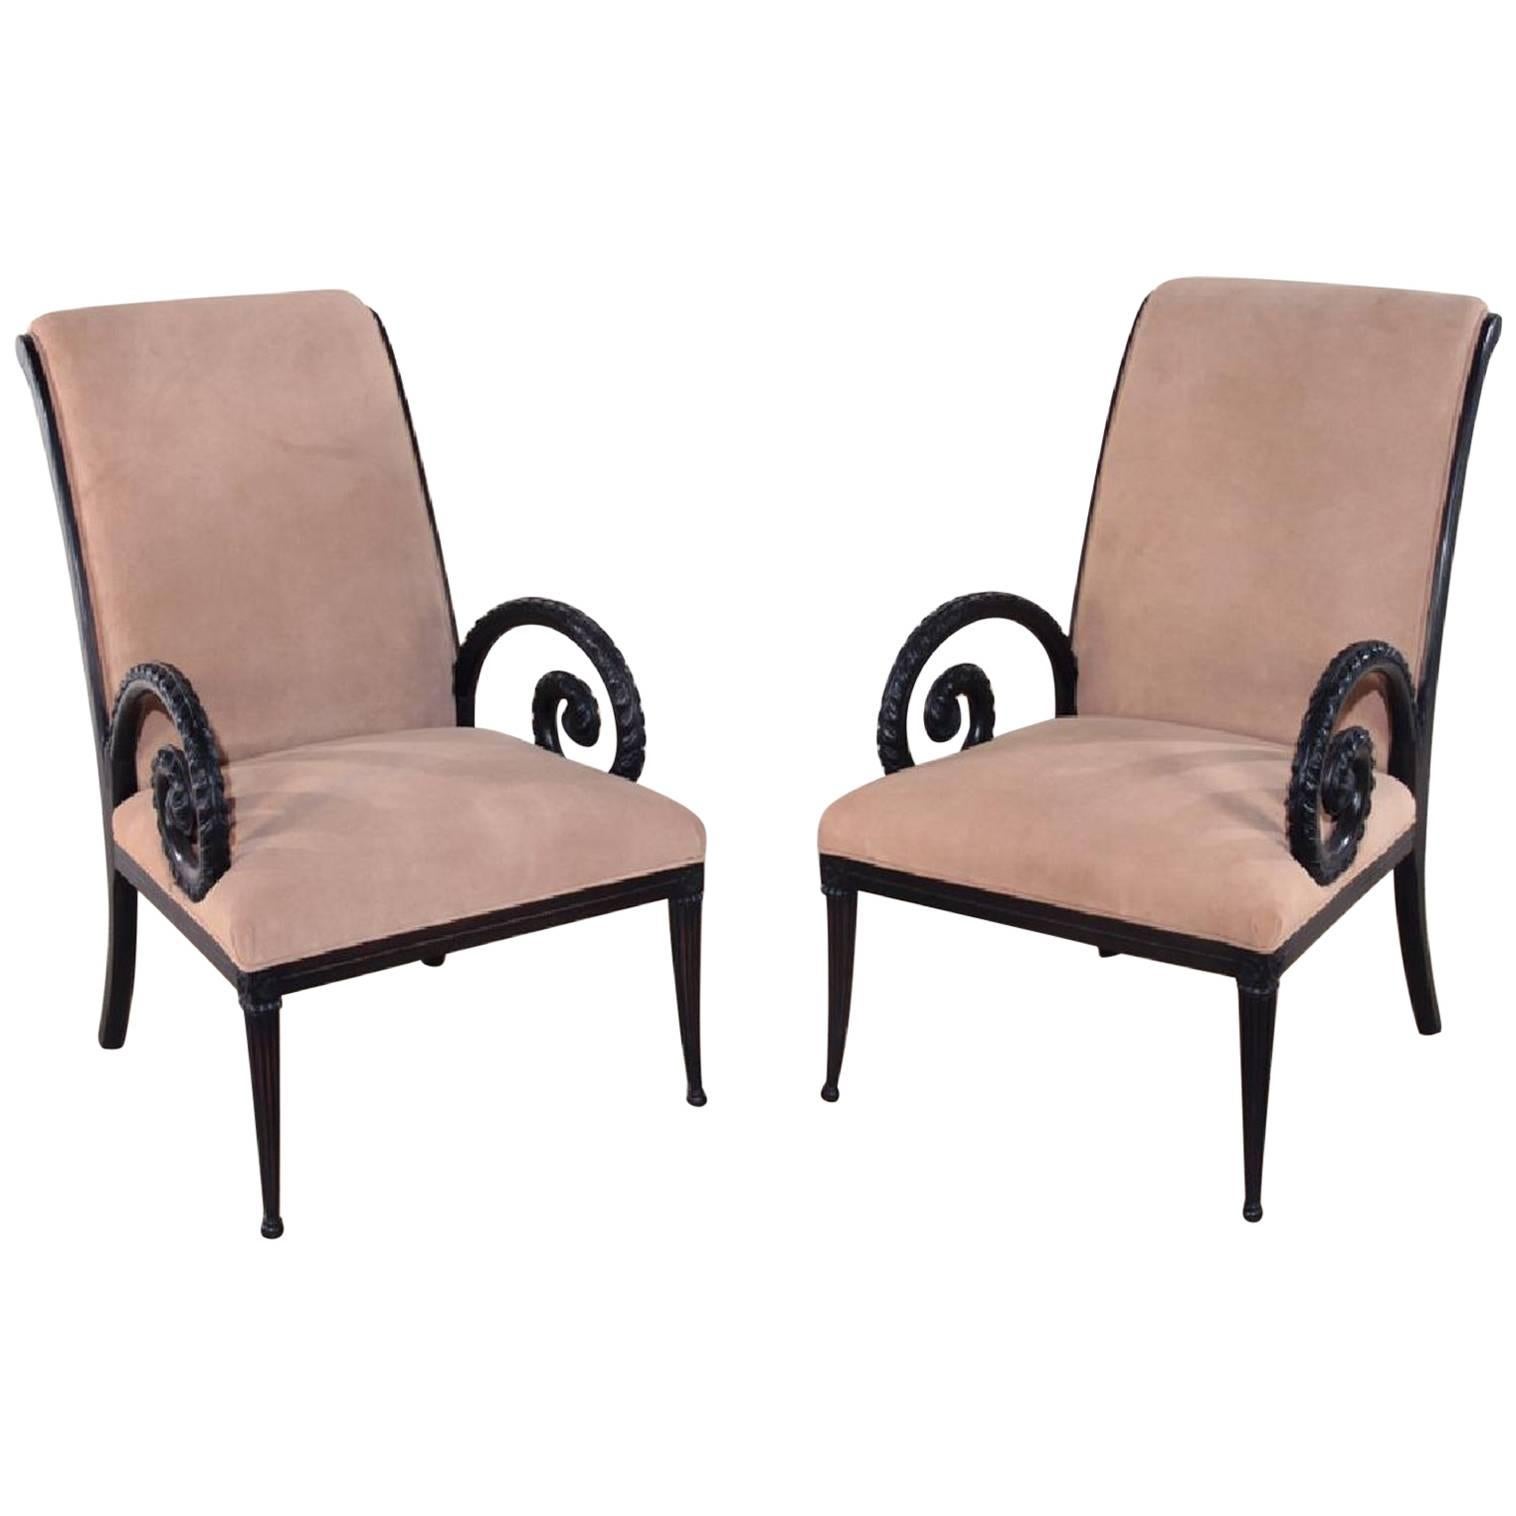 Pair of Ebonized Scrolled Armchairs by Grosfeld House, circa 1960s For Sale